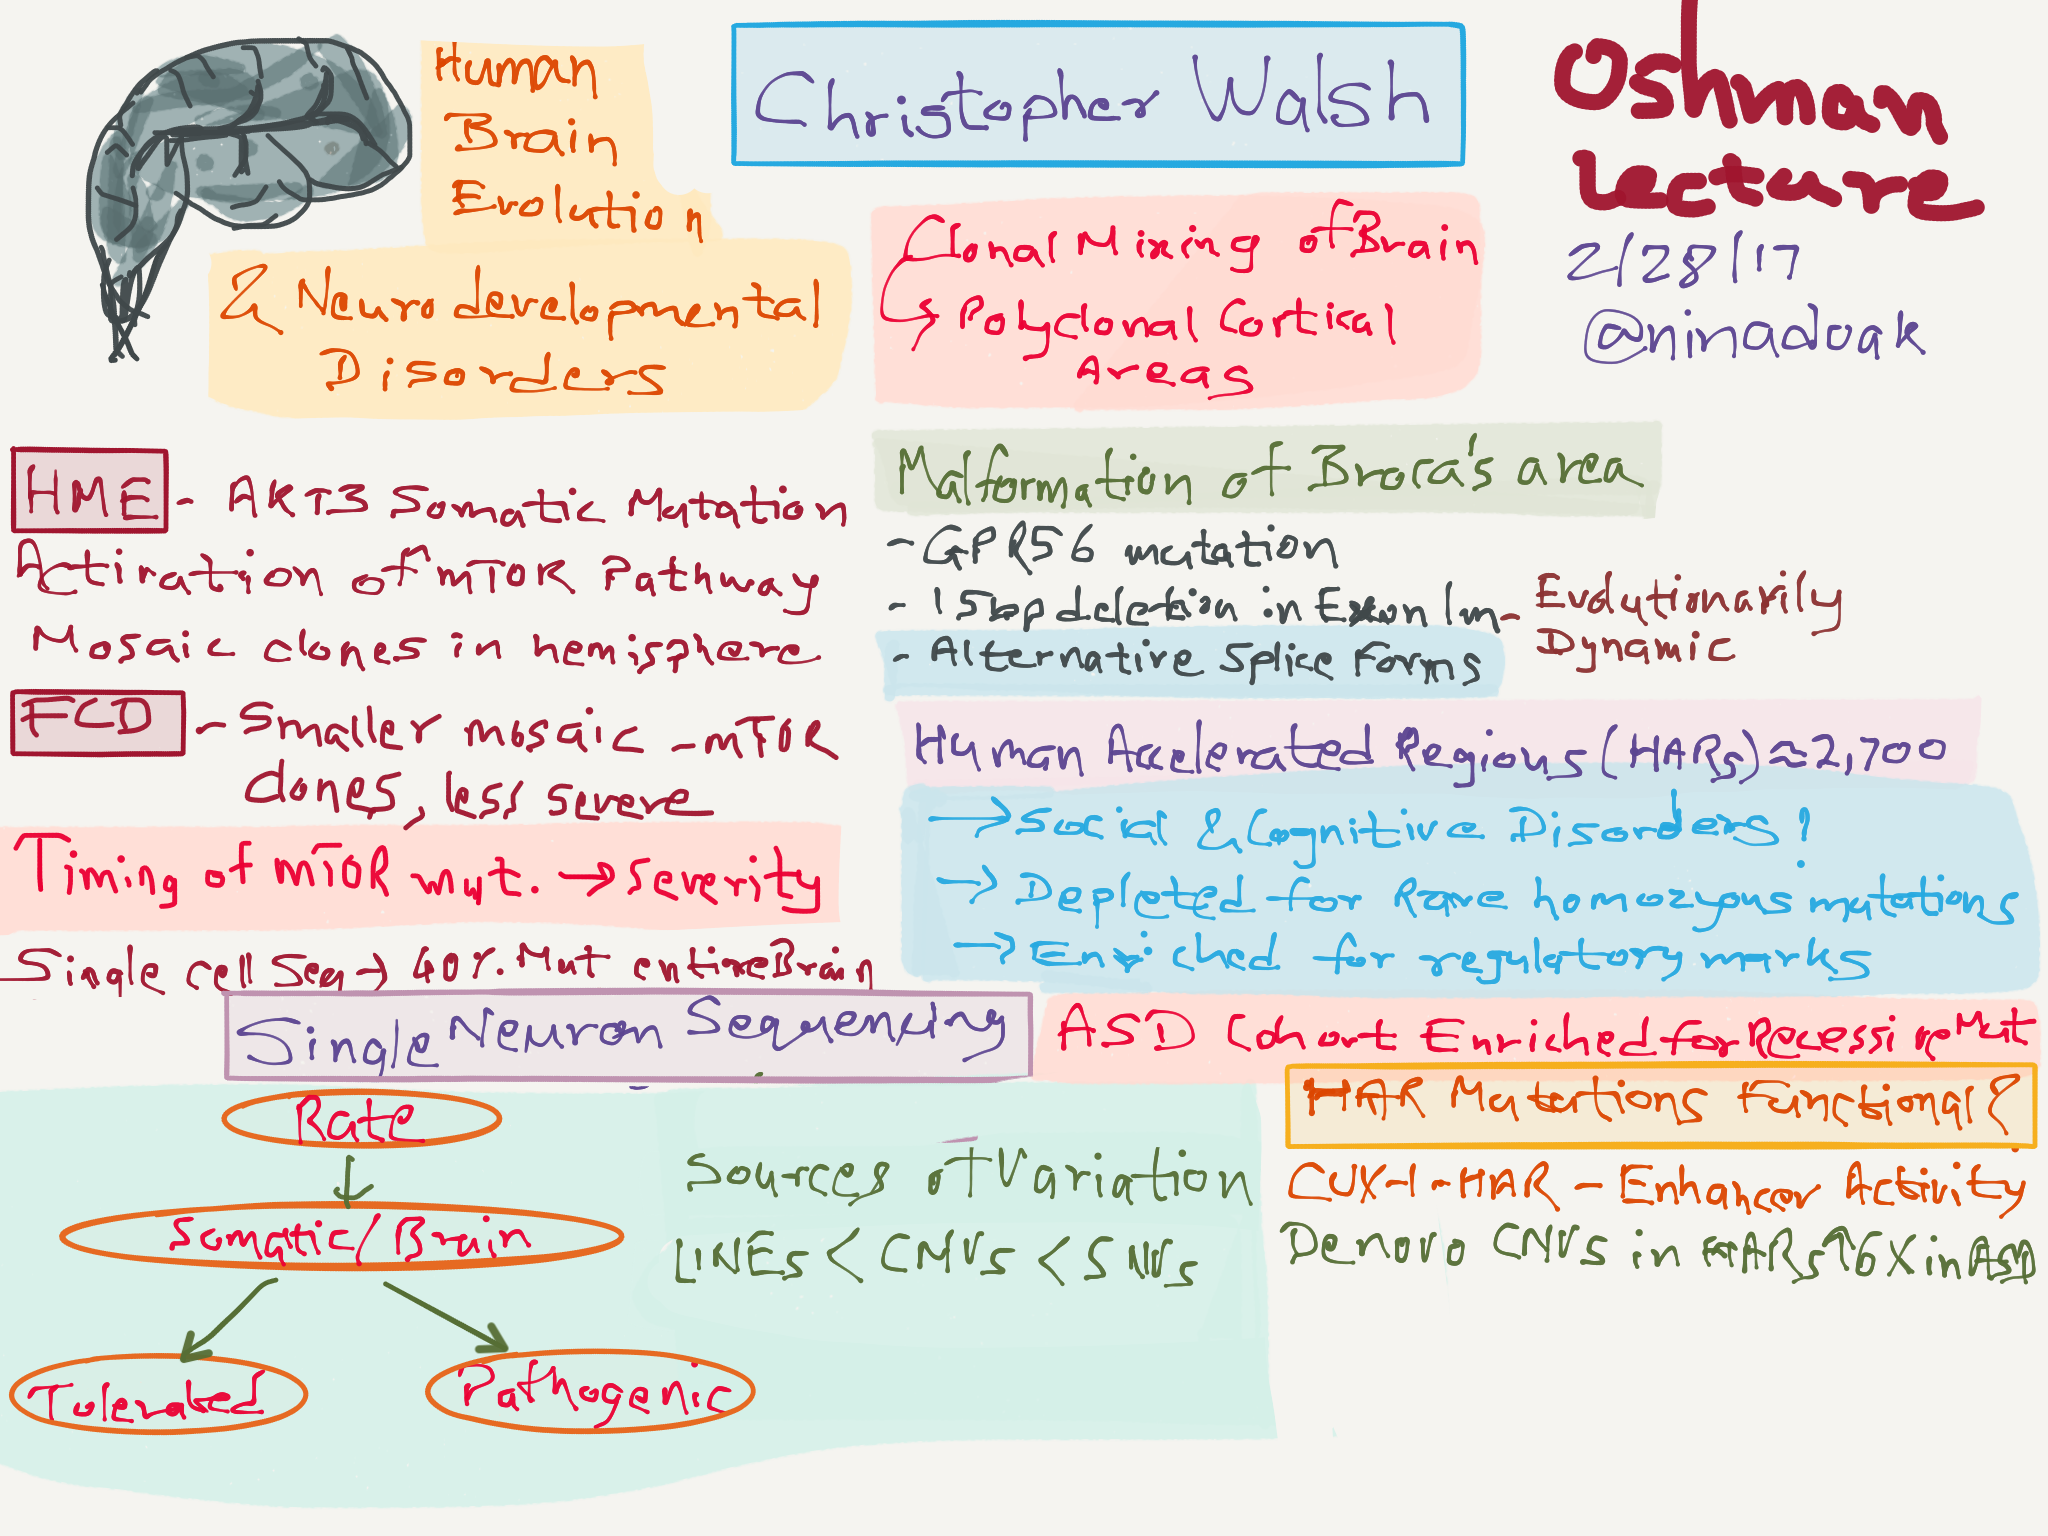 Christopher Walsh- Oshman Lecture.png